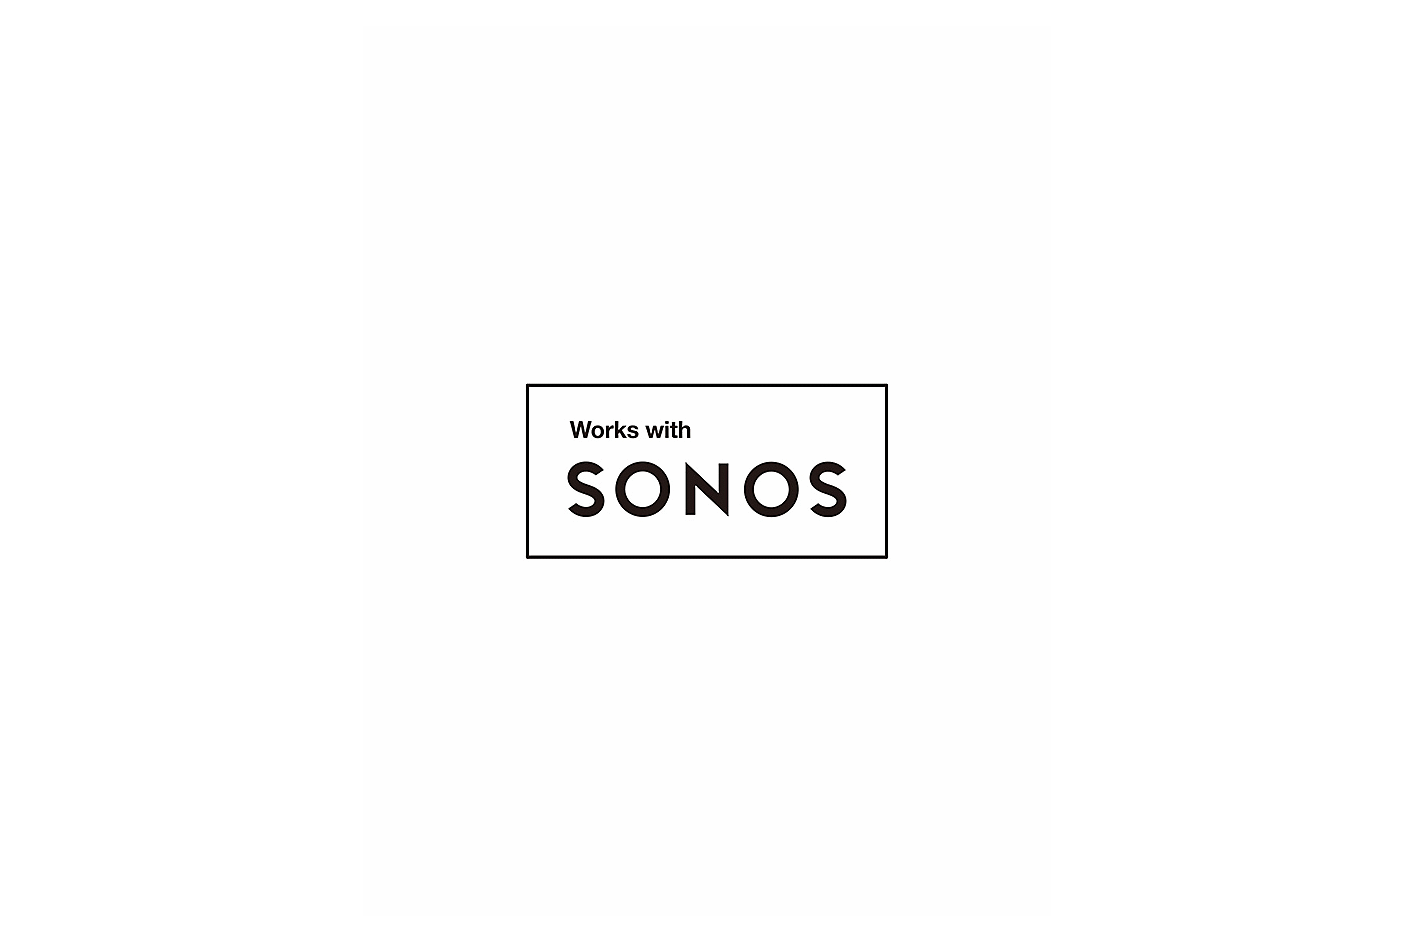 Image of a Works with Sonos logo